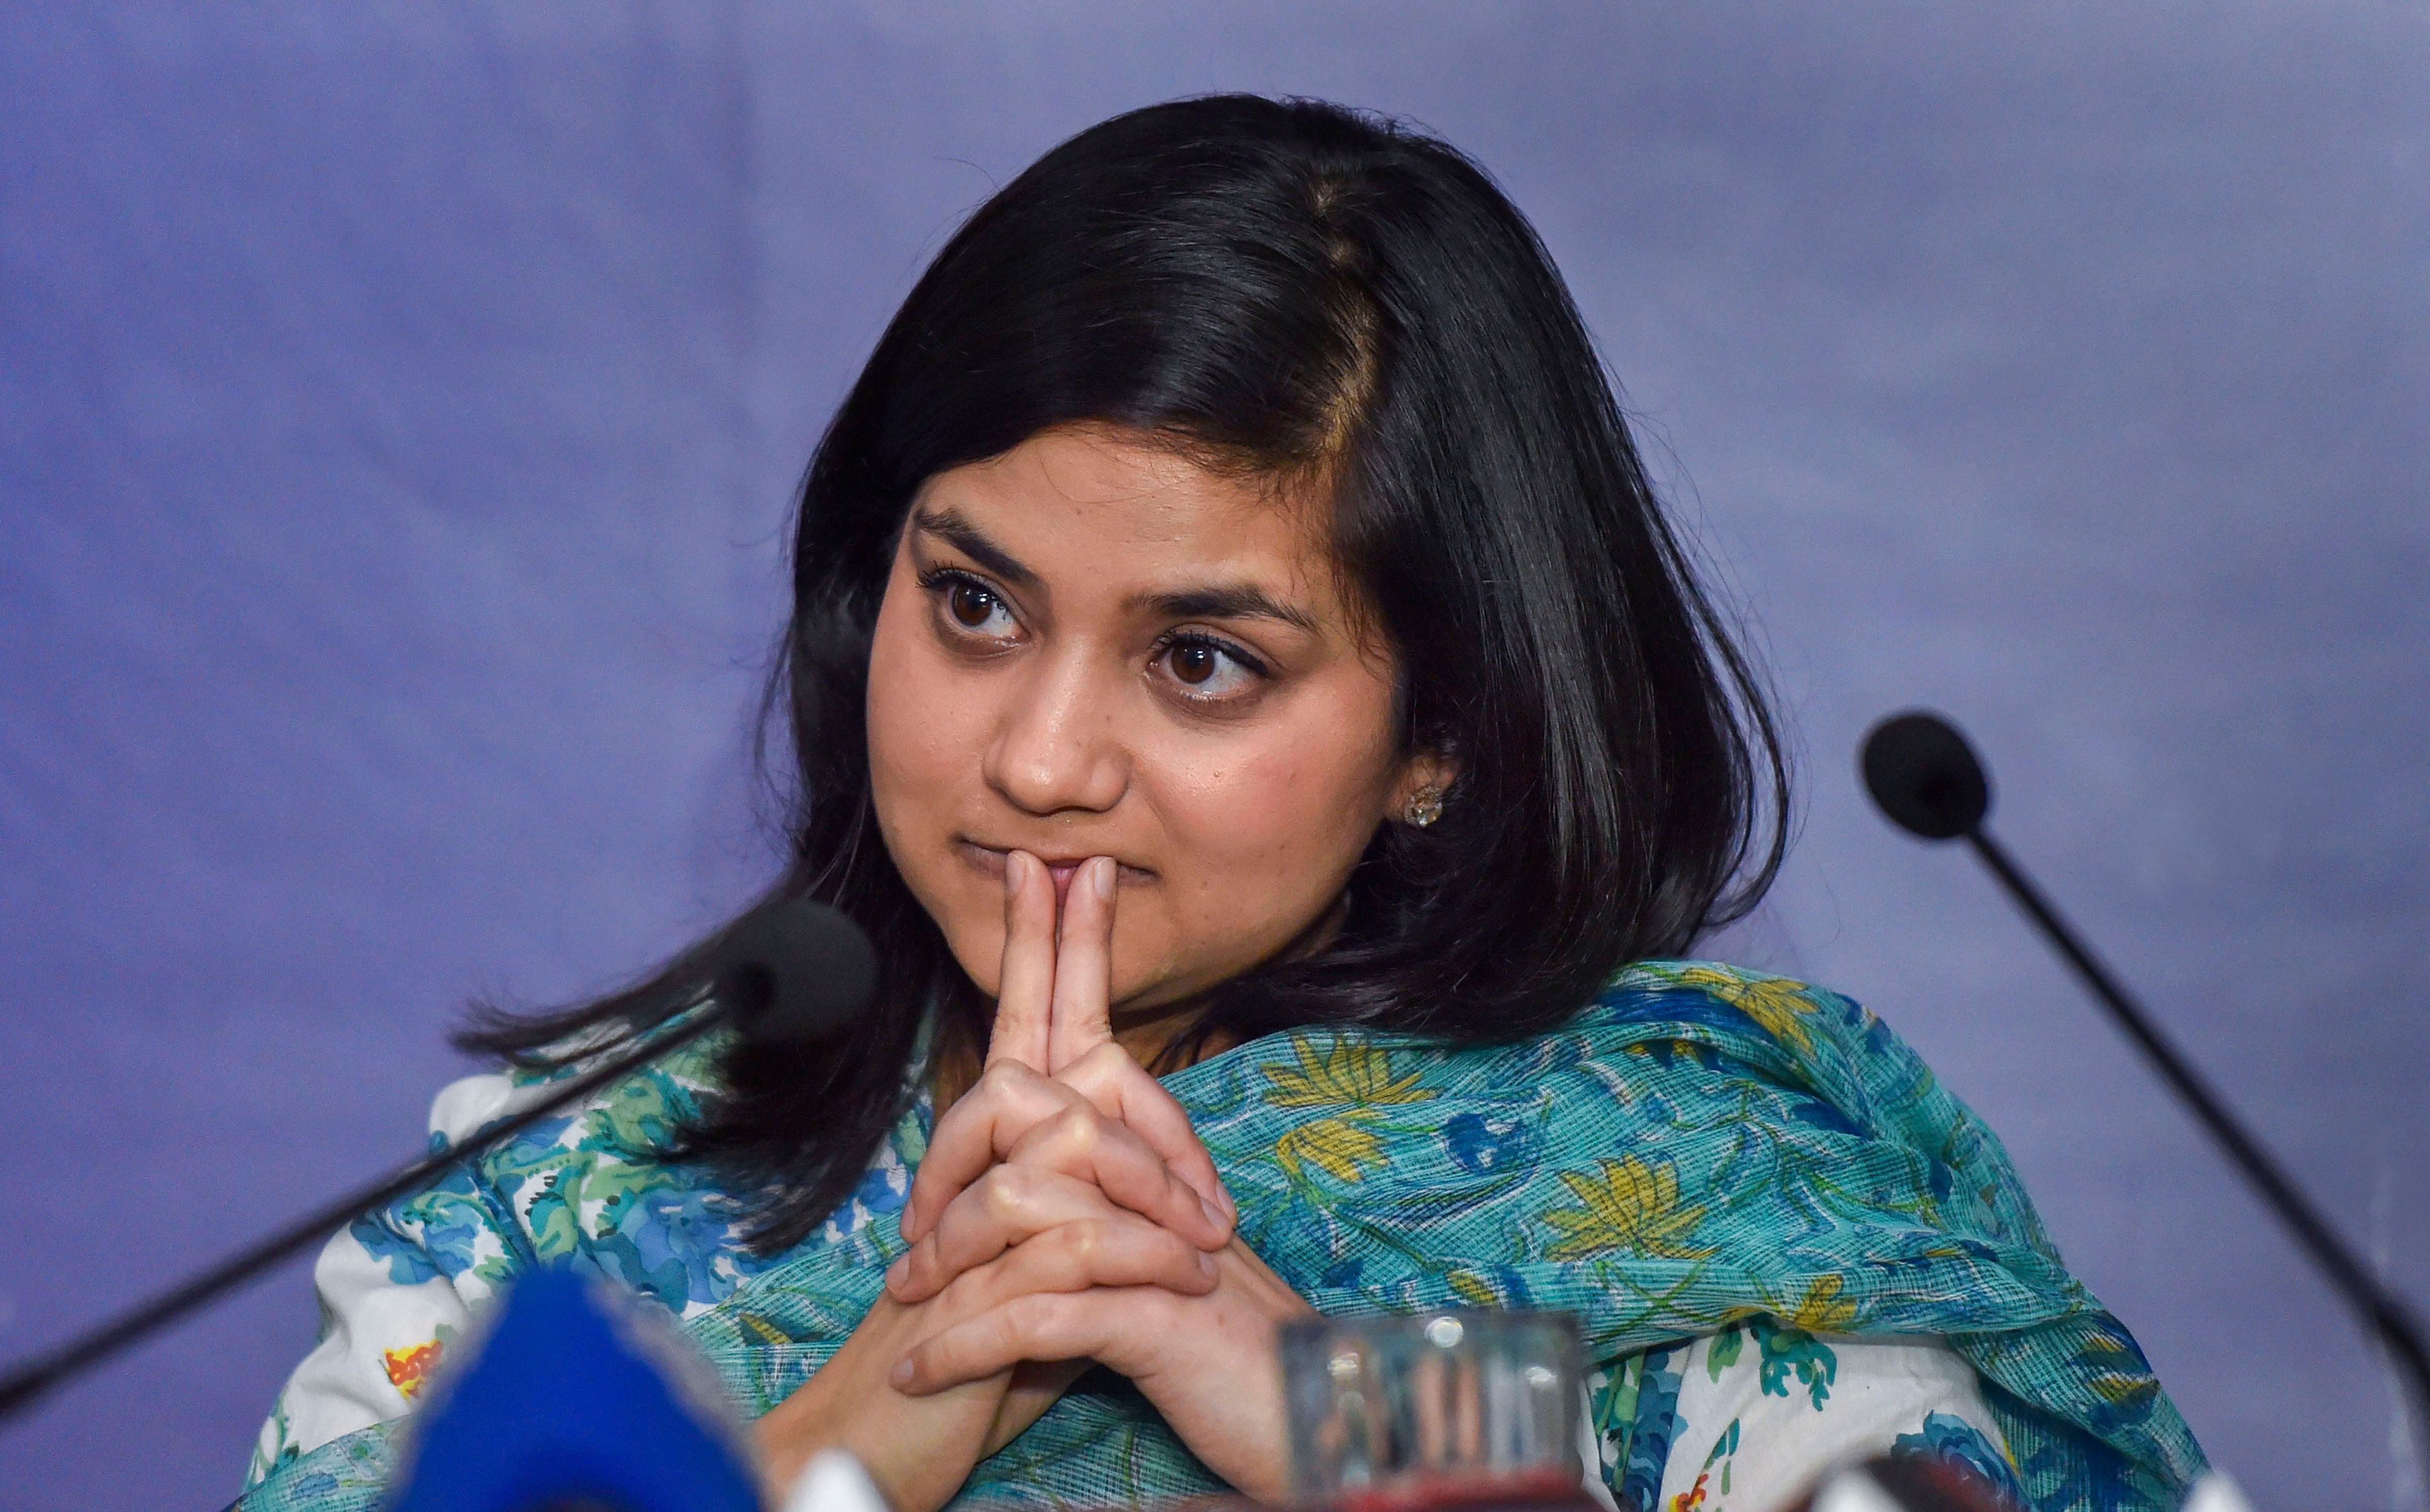 Former chief minister and Peoples Democratic Party (PDP) leader Mehbooba Mufti’s daughter Iltija Mufti during a press interaction at the Indian Women's Press Corps (IWPC) in New Delhi. (PTI Photo)